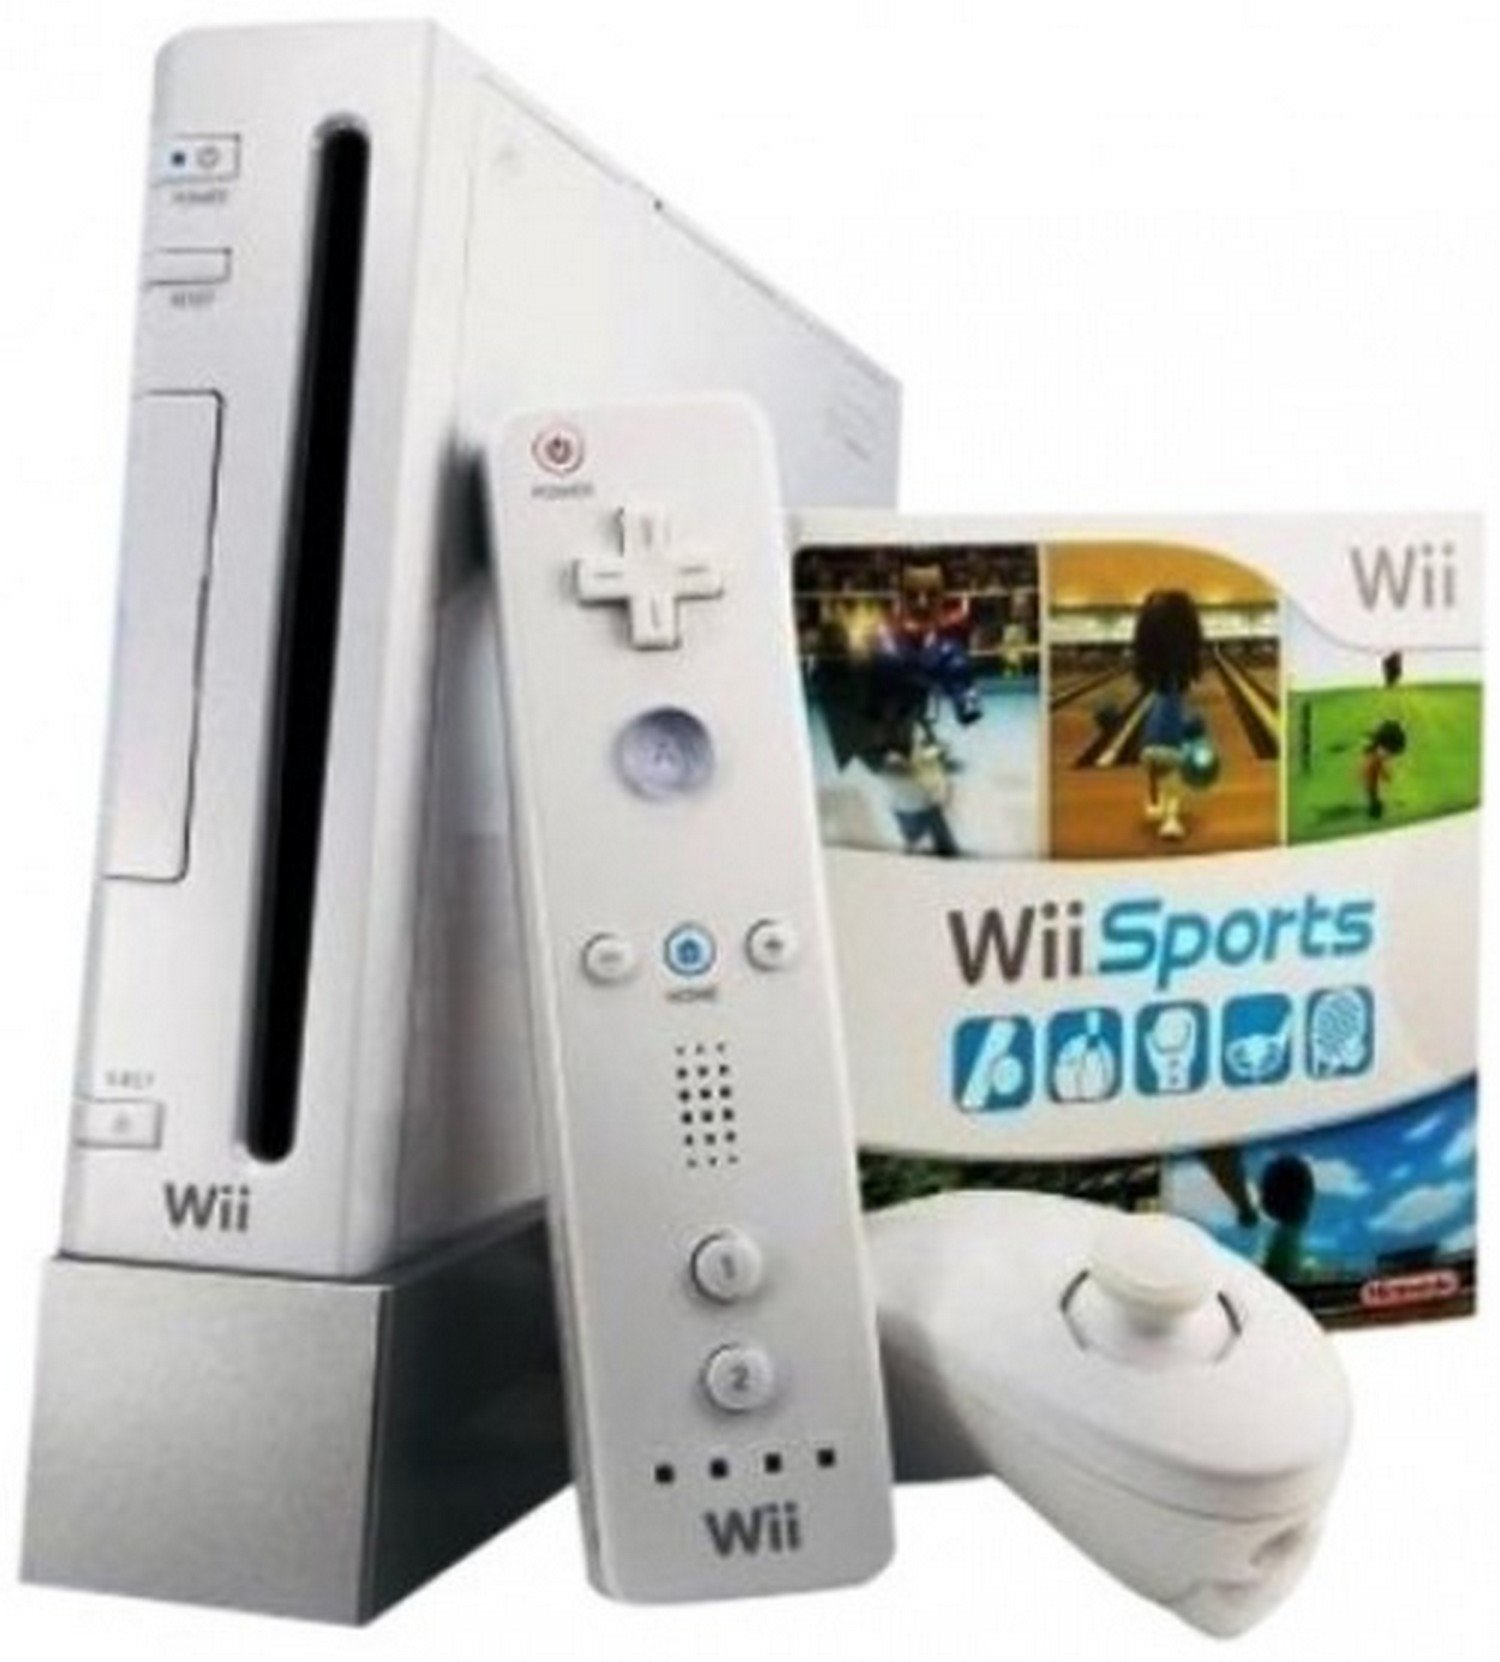 Image of a Wii disc being inserted into the console